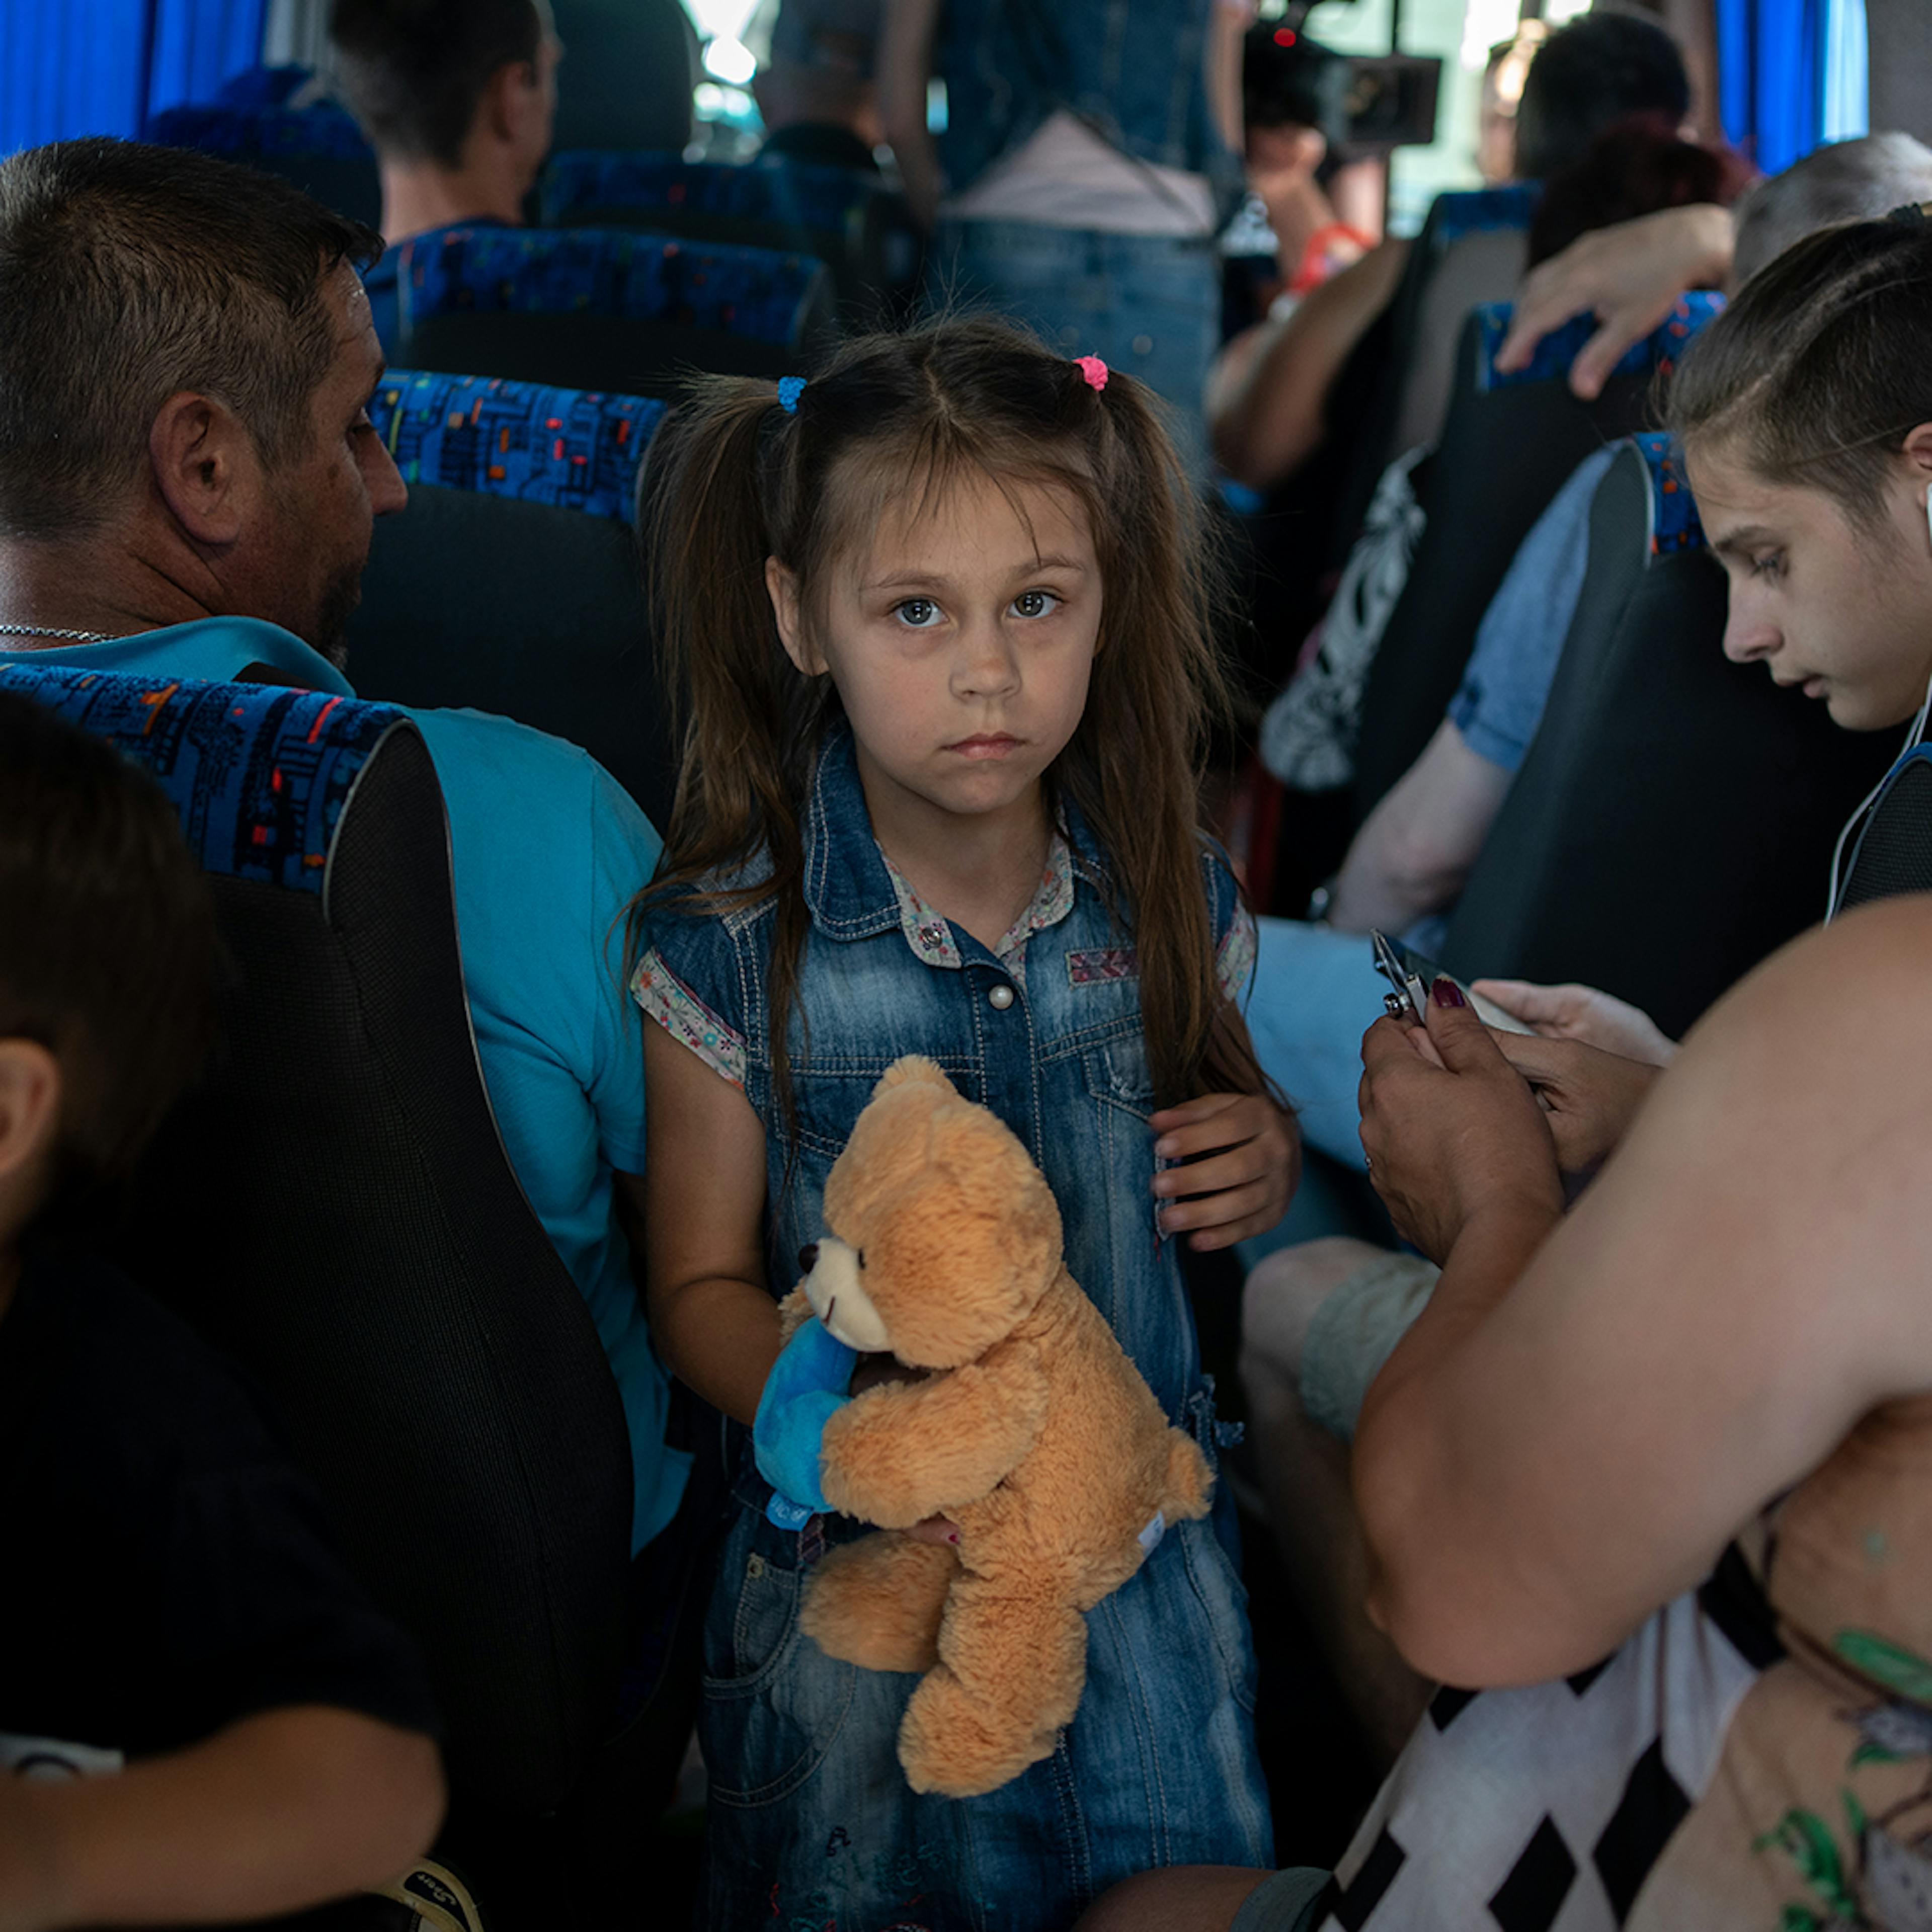 June 7, 2023. Kherson, Ukraine. Dmytro, a father of five children (on the left with his back), his daughter Anya, 7 years old, and his son Ernest, 15 years old (on the right, wearing headphones) are in the evacuation bus at the Kherson bus station.